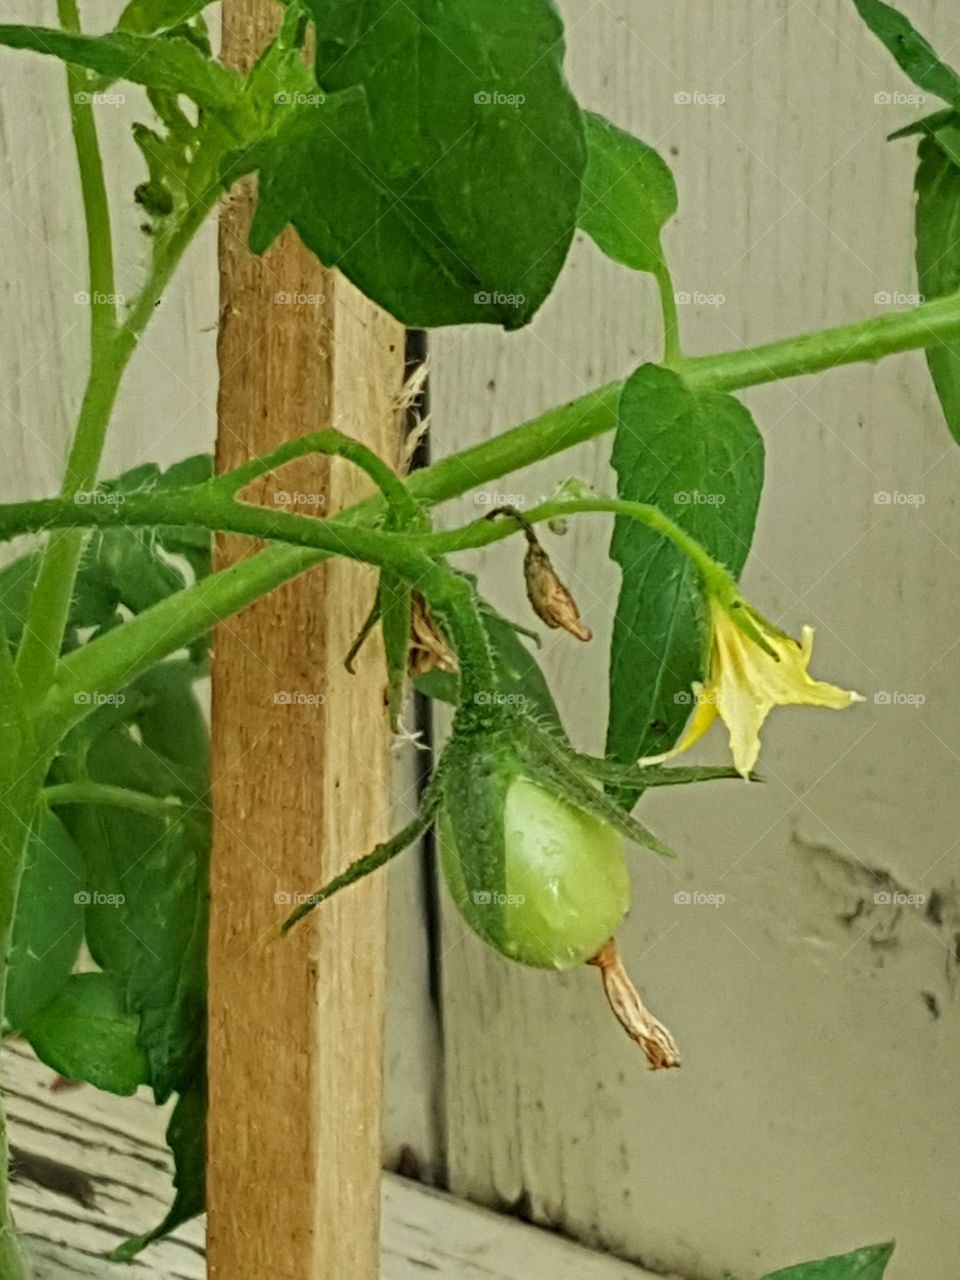 Tomato Fruit and Flower